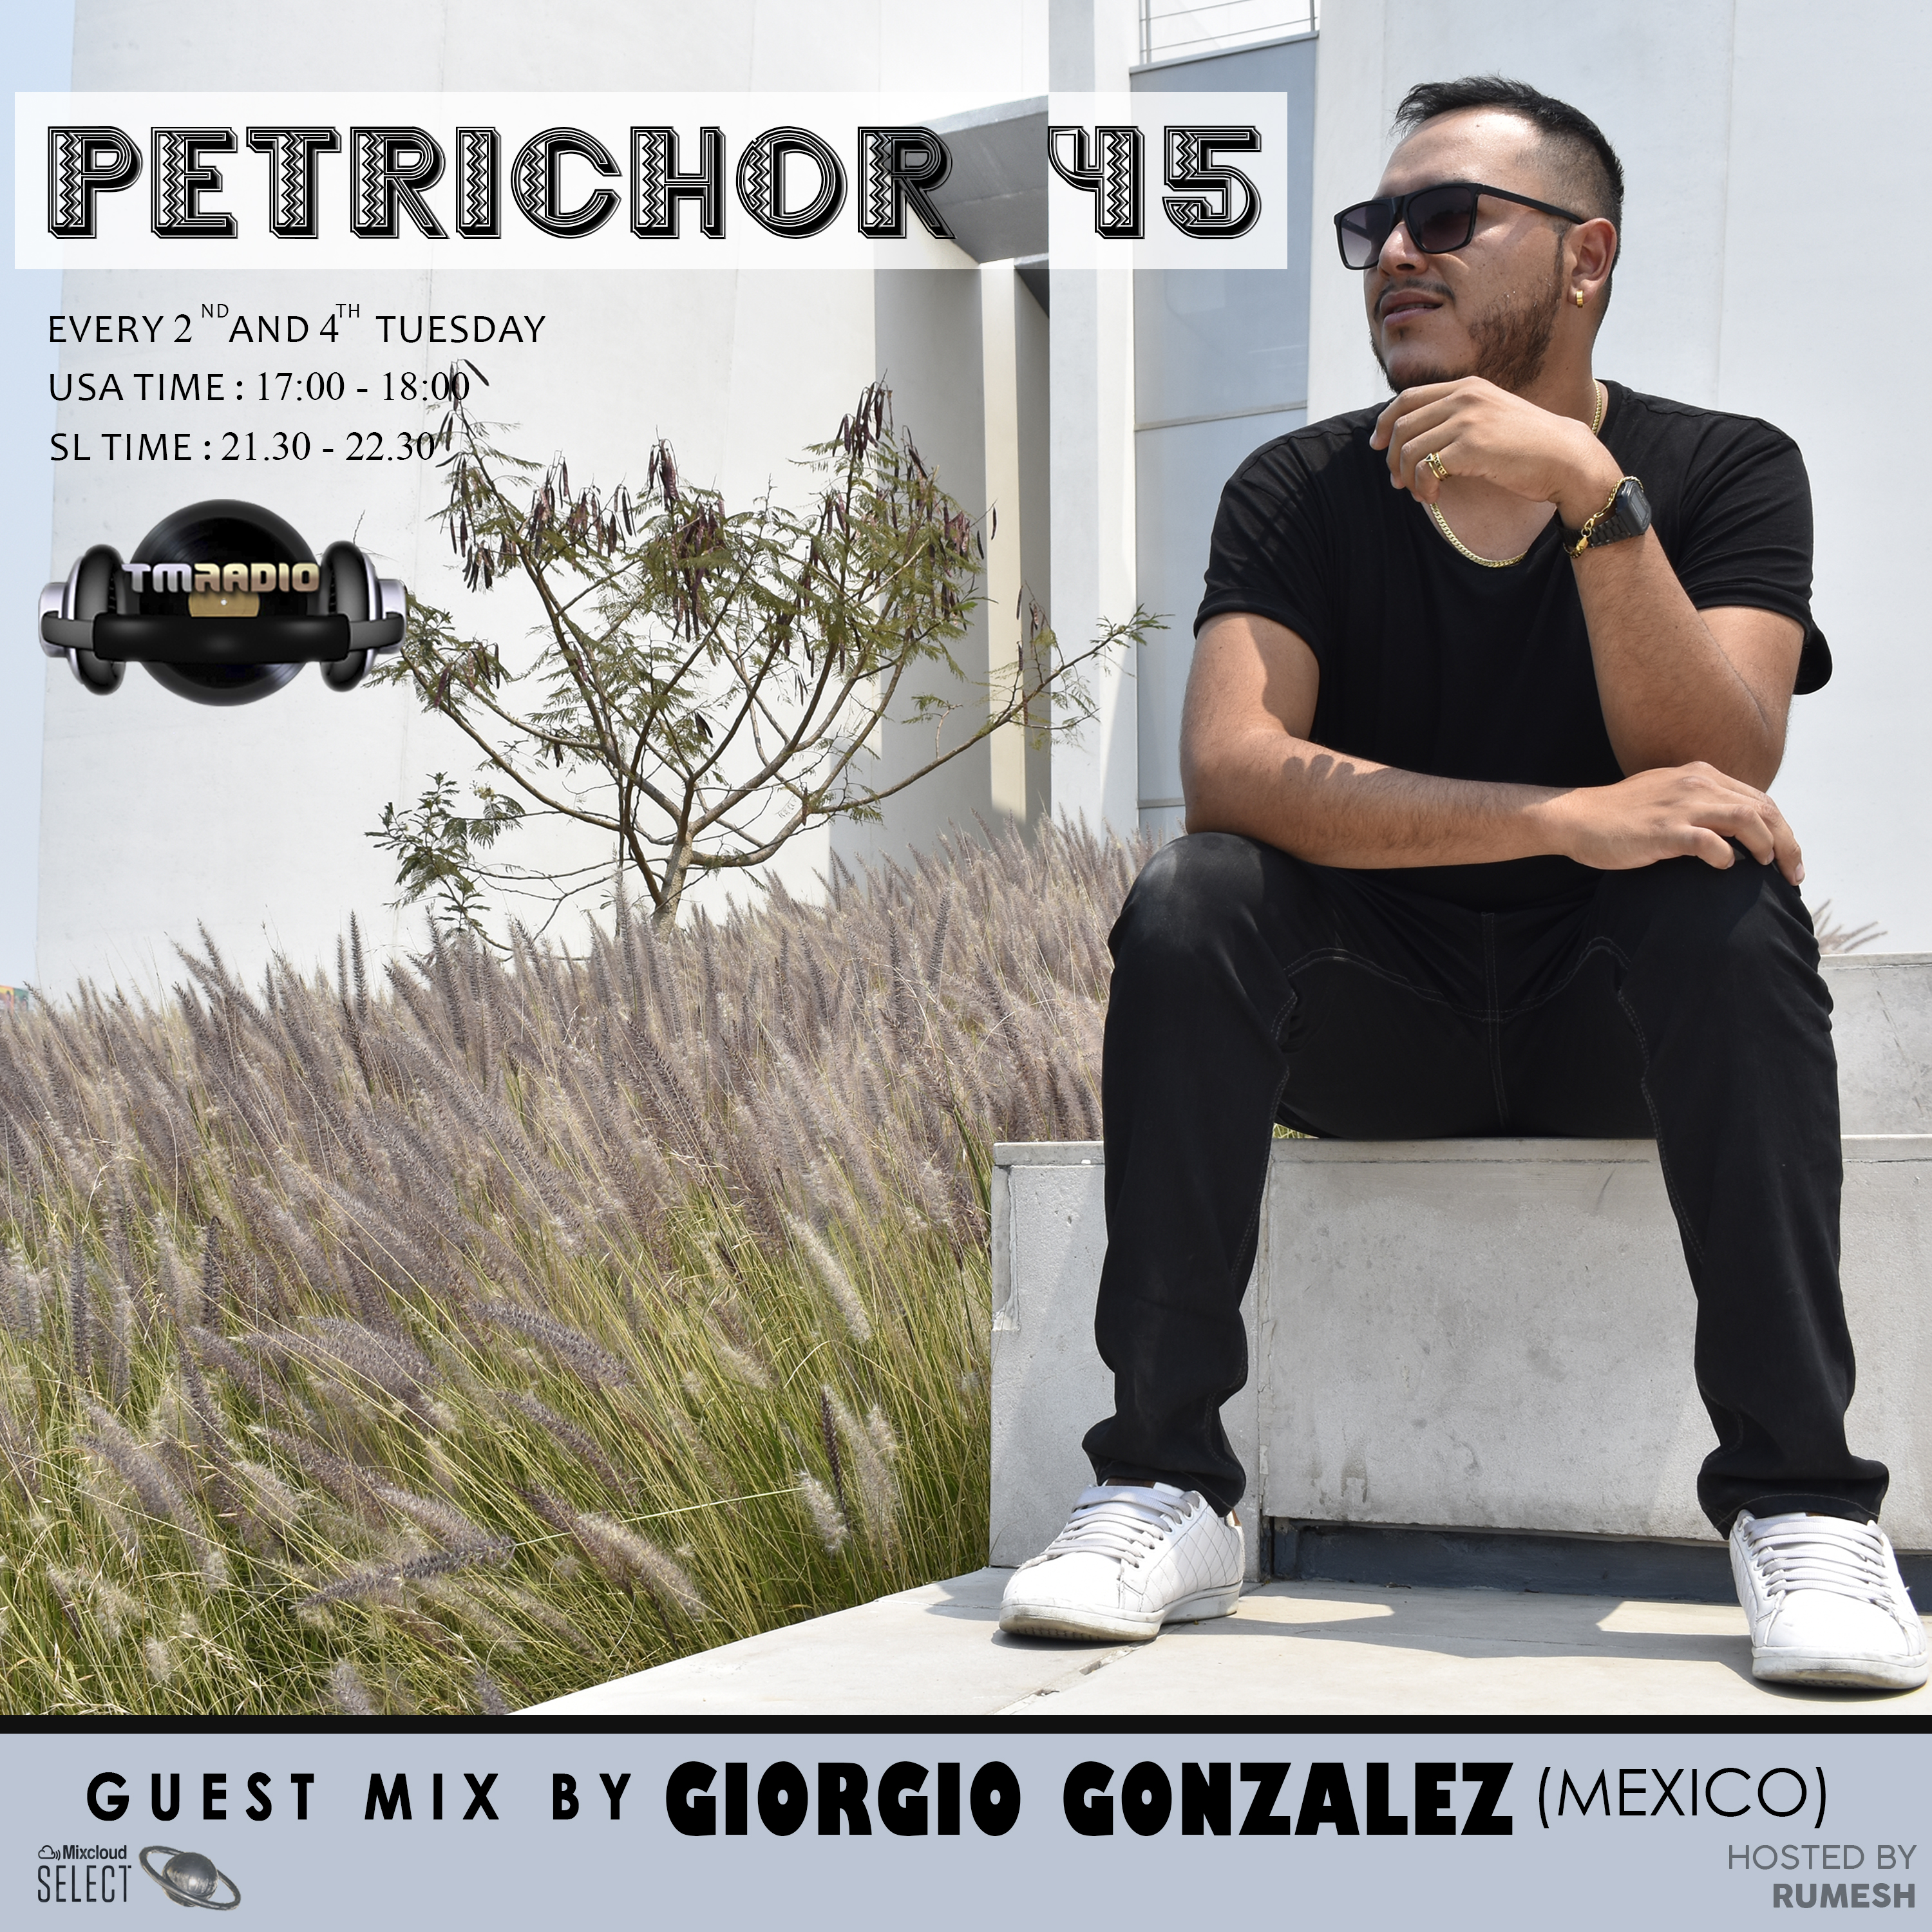 Petrichor 45 guest mix by Giorgio Gonzalez (Mexico) (from September 17th, 2019)